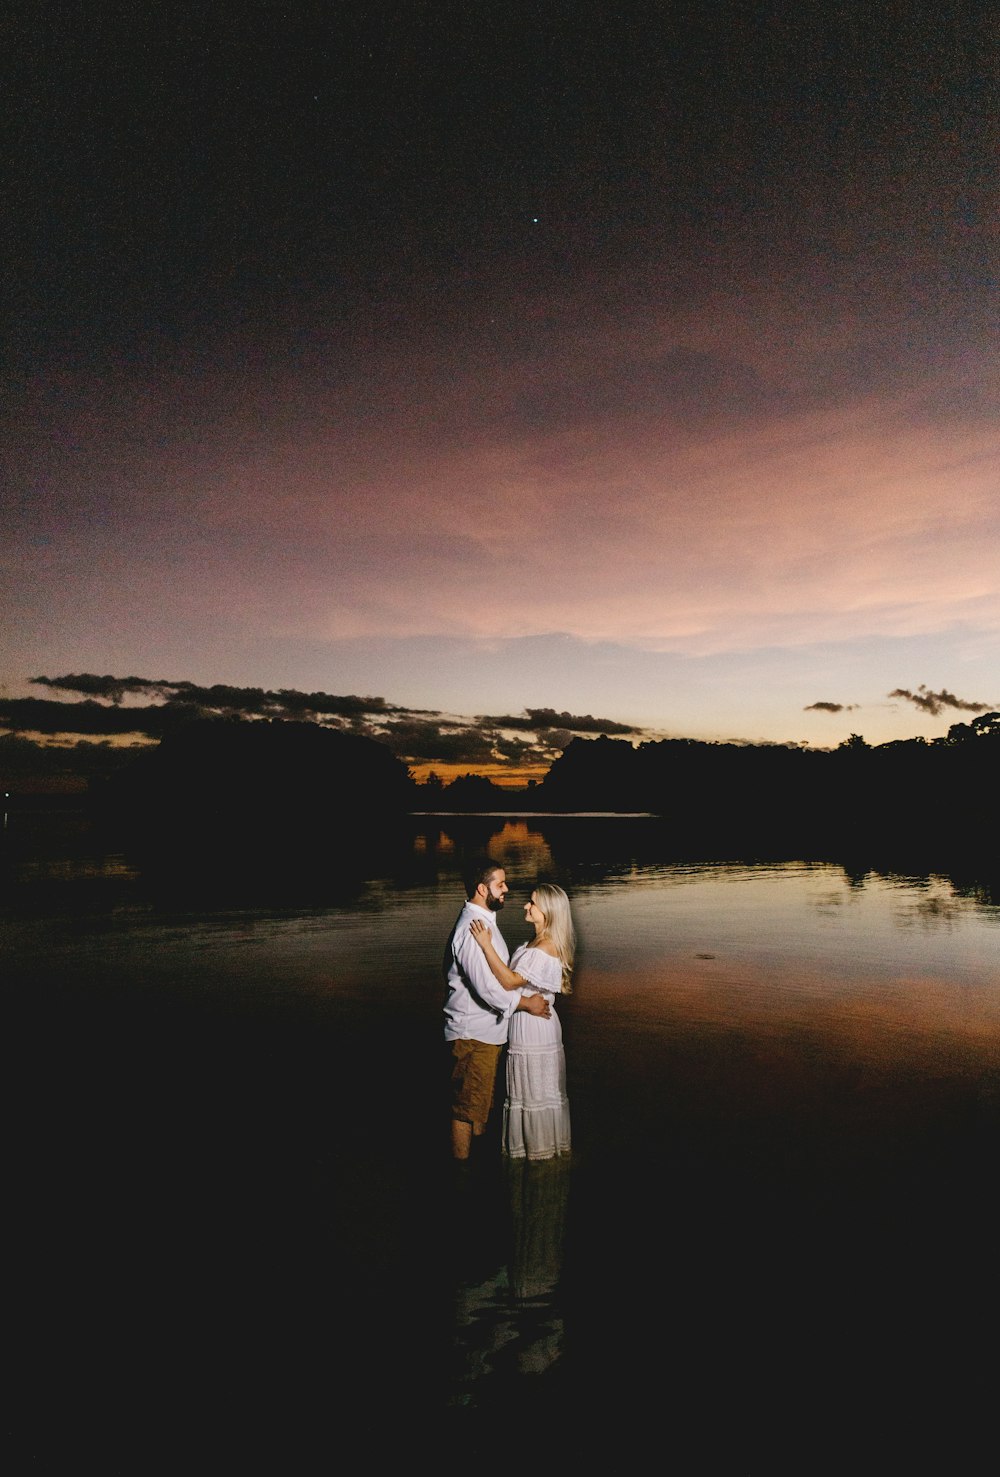 woman in white long sleeve shirt standing beside woman in white long sleeve shirt during sunset